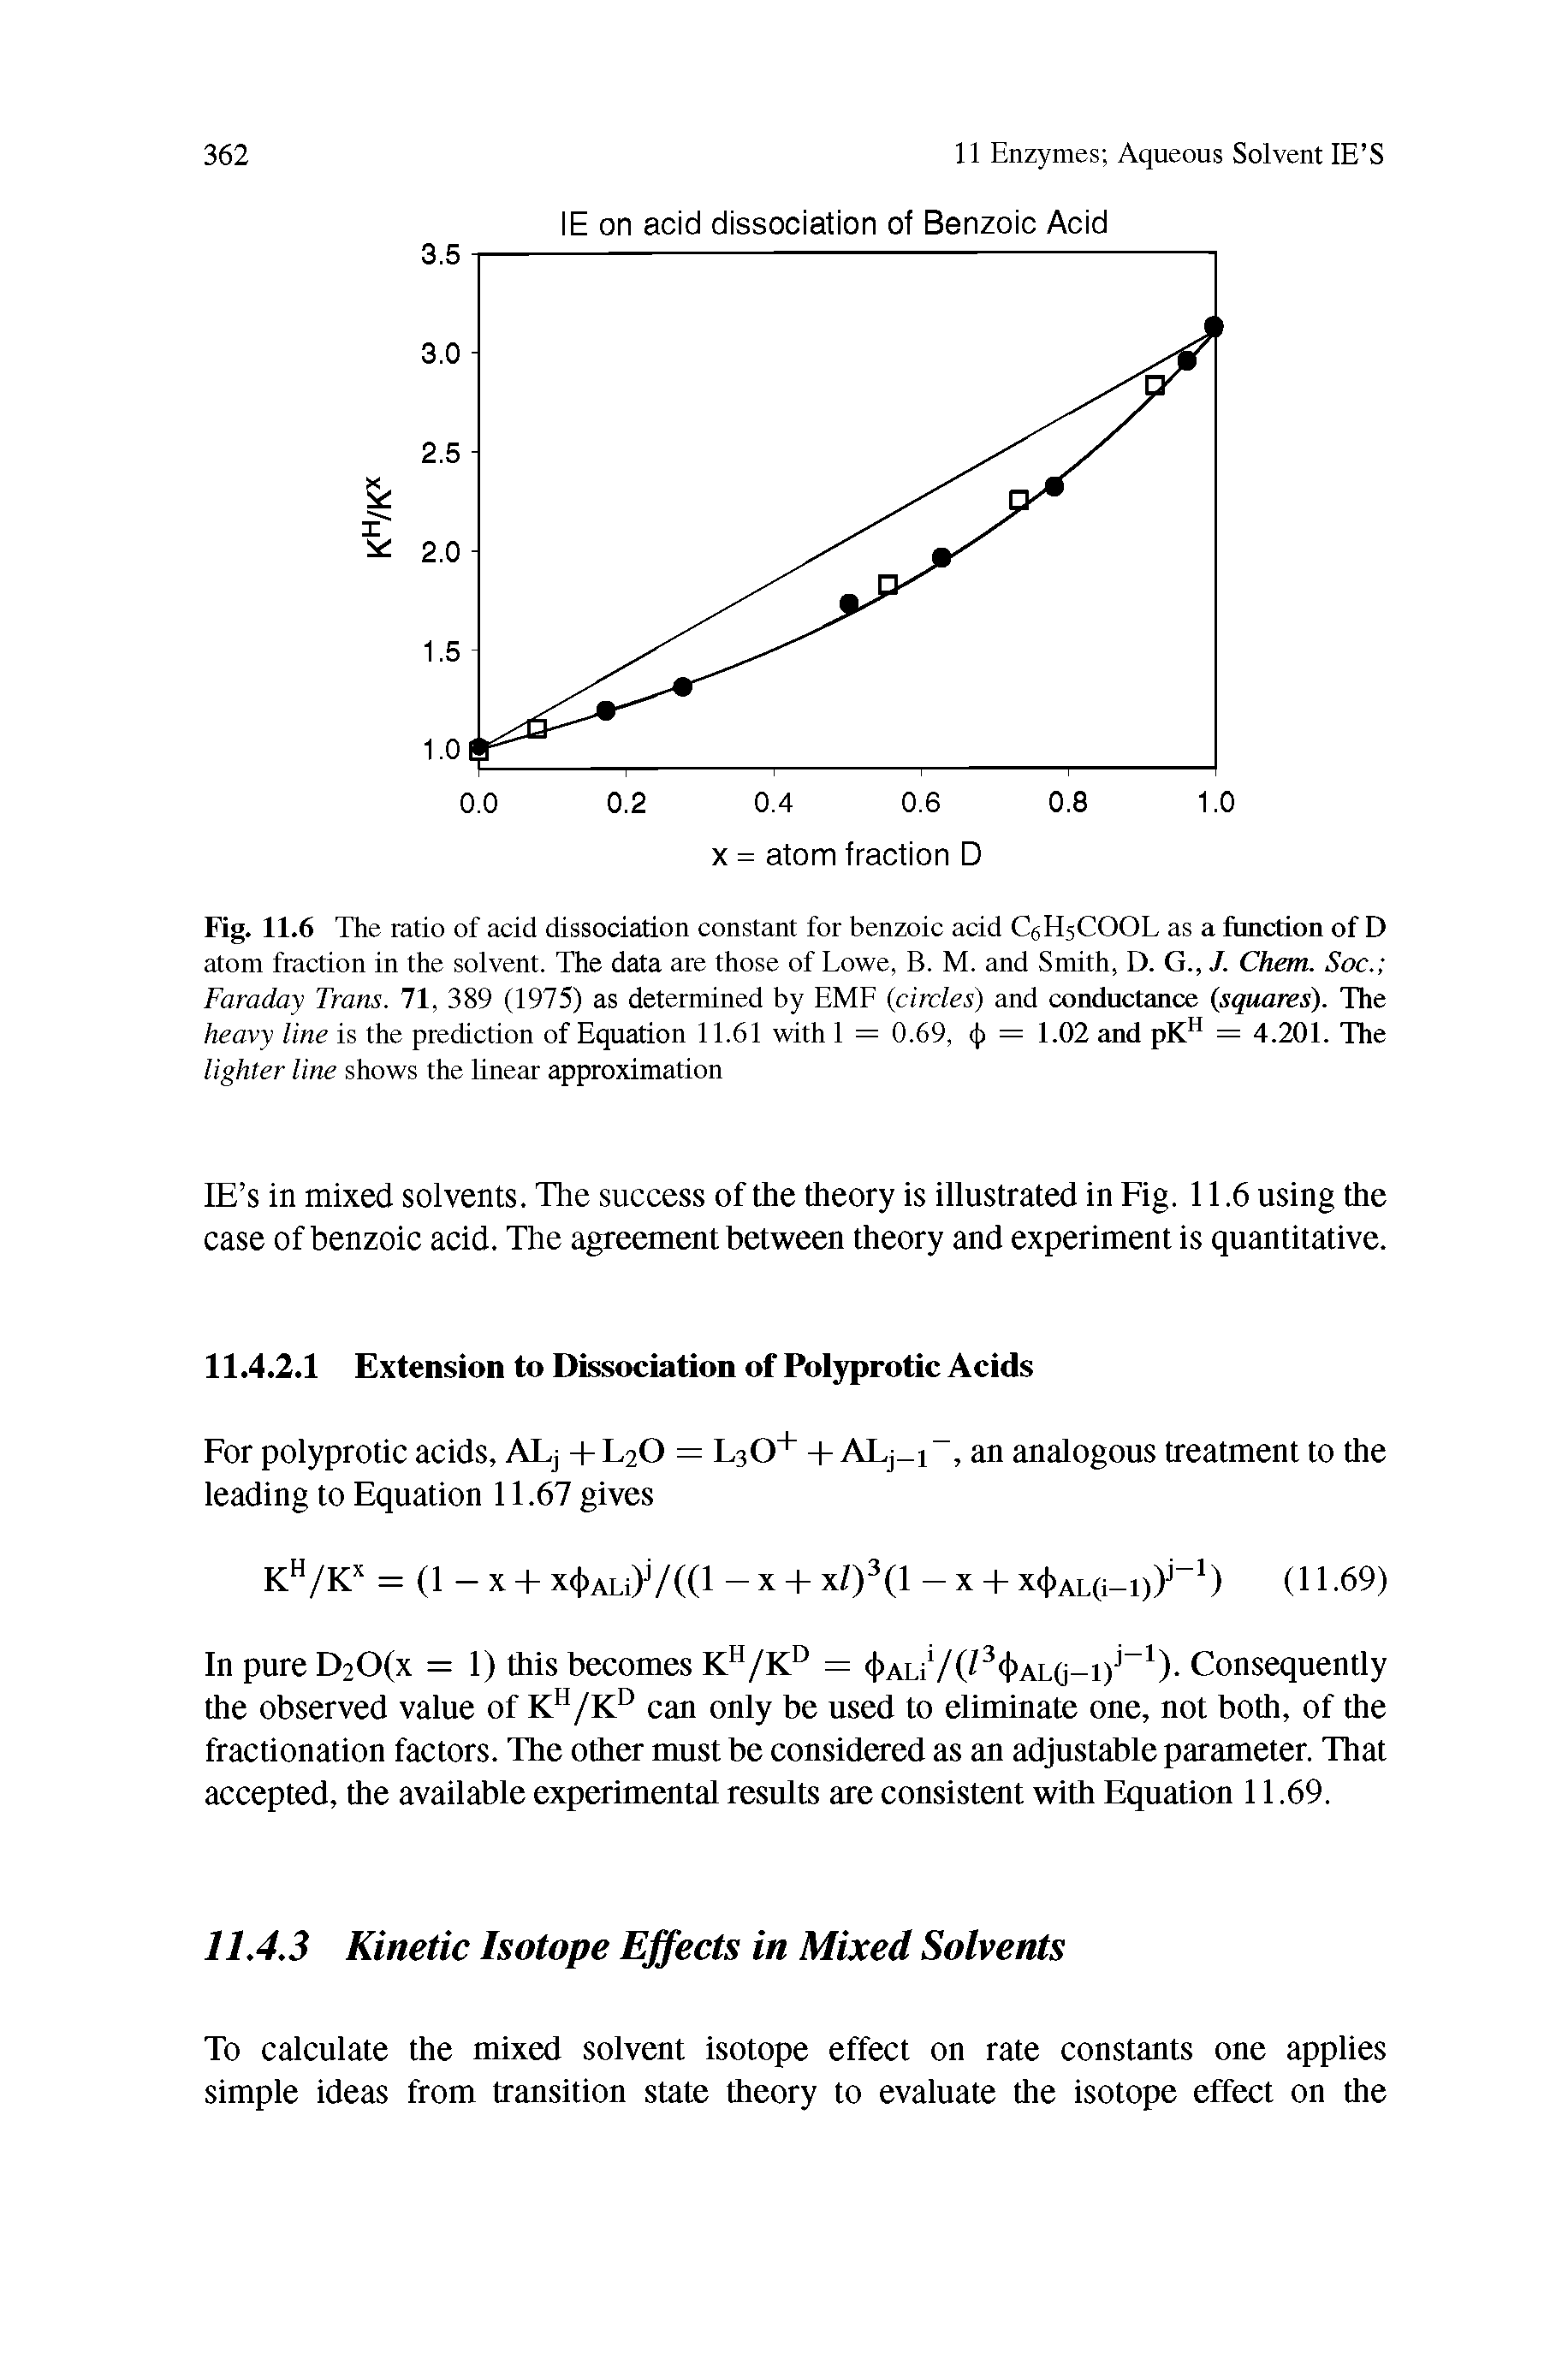 Fig. 11.6 The ratio of acid dissociation constant for benzoic acid CgHsCOOL as a function of D atom fraction in the solvent. The data are those of Lowe, B. M. and Smith, D. G., J. Chem. Soc. Faraday Tram. 71, 389 (1975) as determined by EMF (circles) and conductance squares). The heavy line is the prediction of Equation 11.61 with 1 = 0.69, 4> = 1.02 and pKH = 4.201. The lighter line shows the linear approximation...